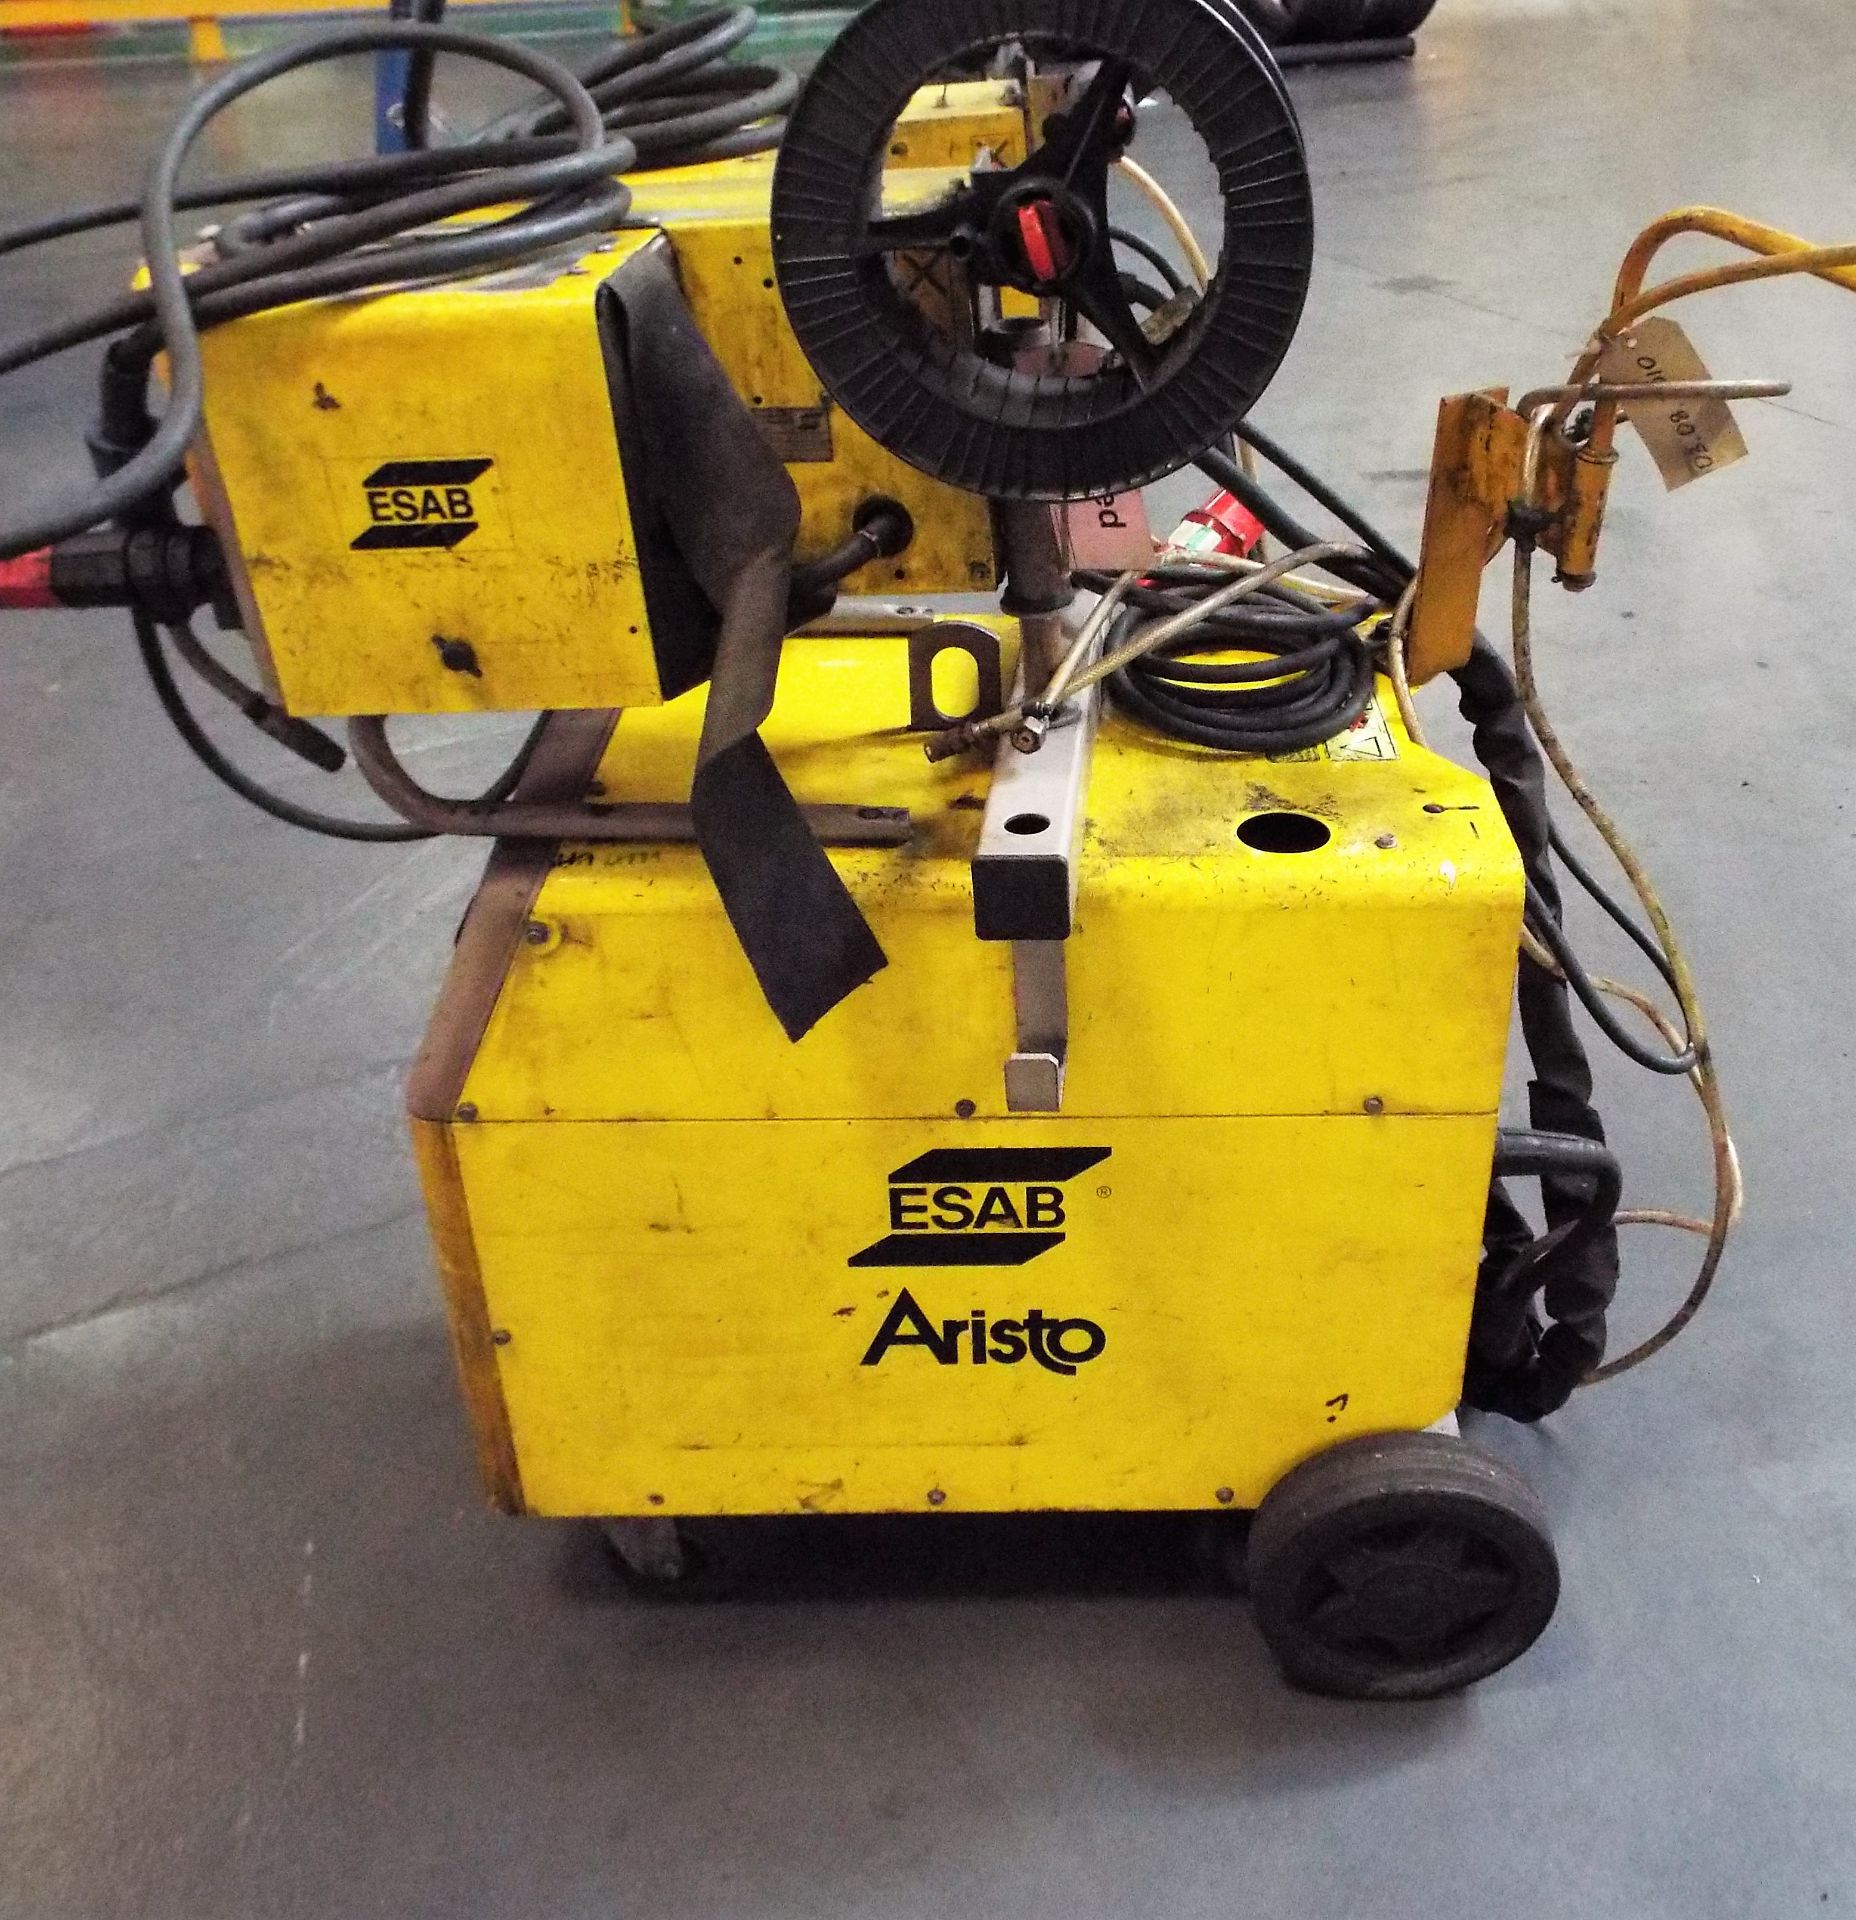 Esab Aristo Portable Welding Set (Dual Station Wire Feed) & Teach Pendant - Image 3 of 10